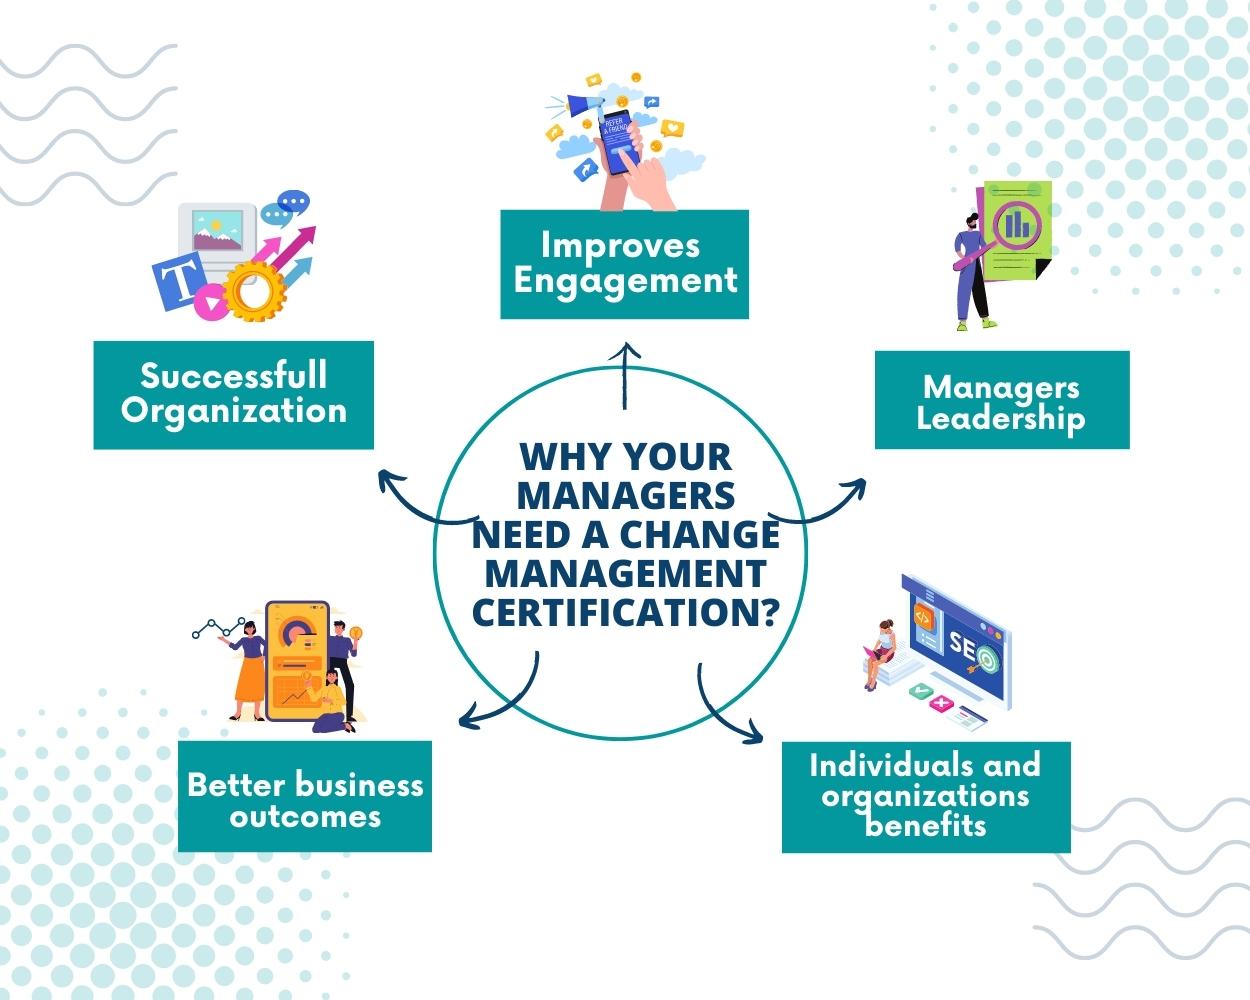 5 Points Explaning Why Your Managers Need a Change Management Certification